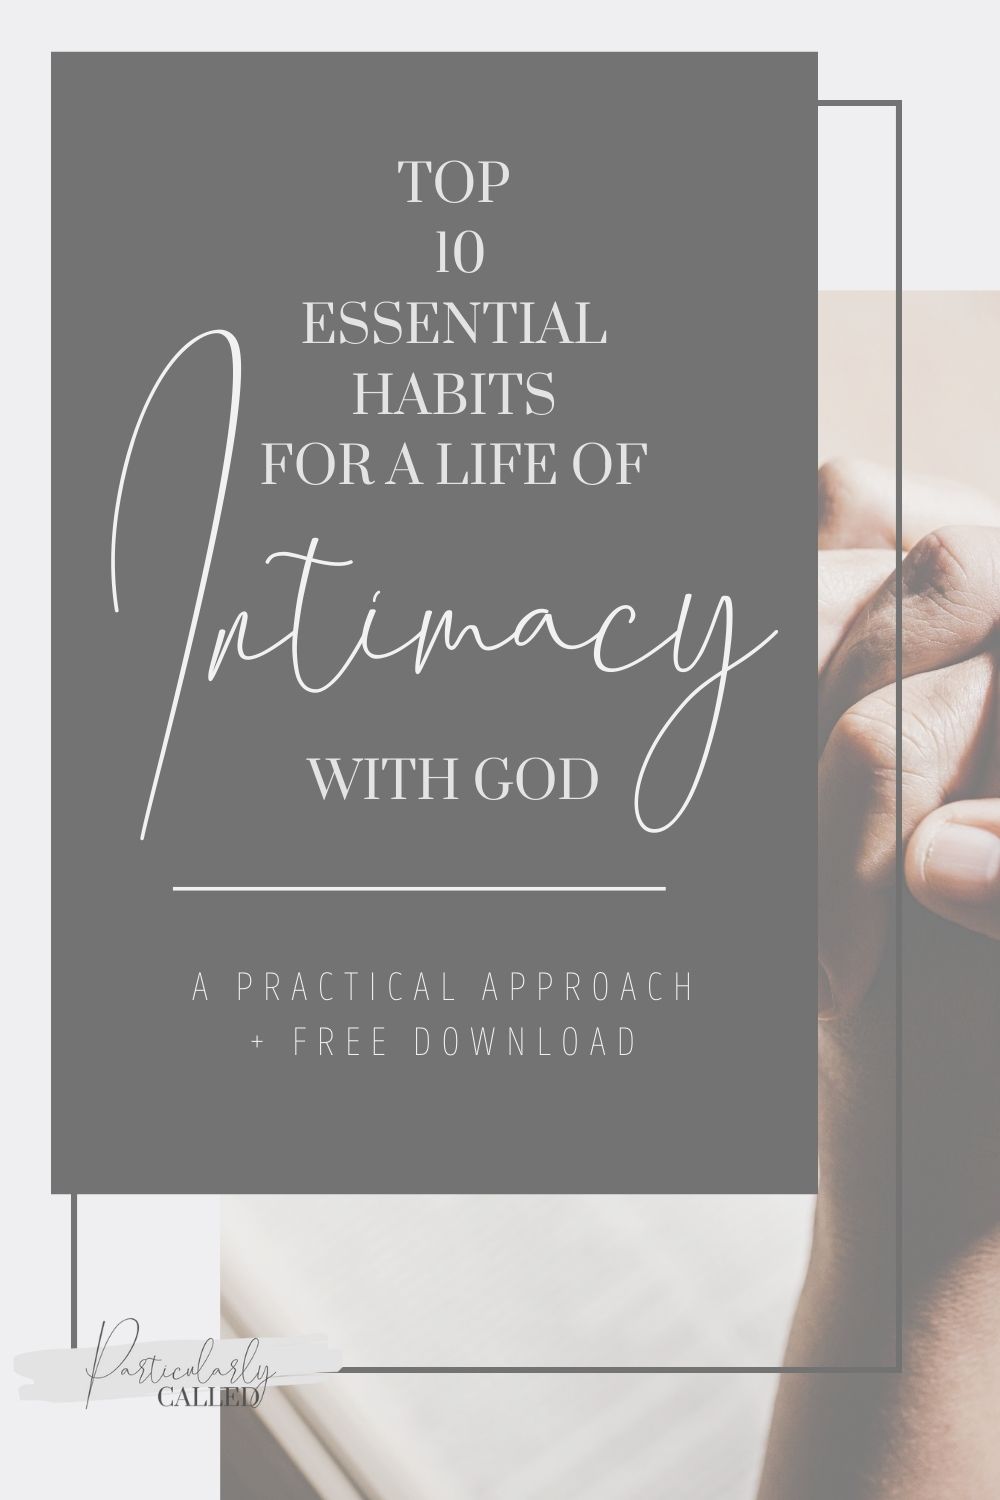 top-10-essential-habits-for-a-life-of-deep-intimacy-with-god